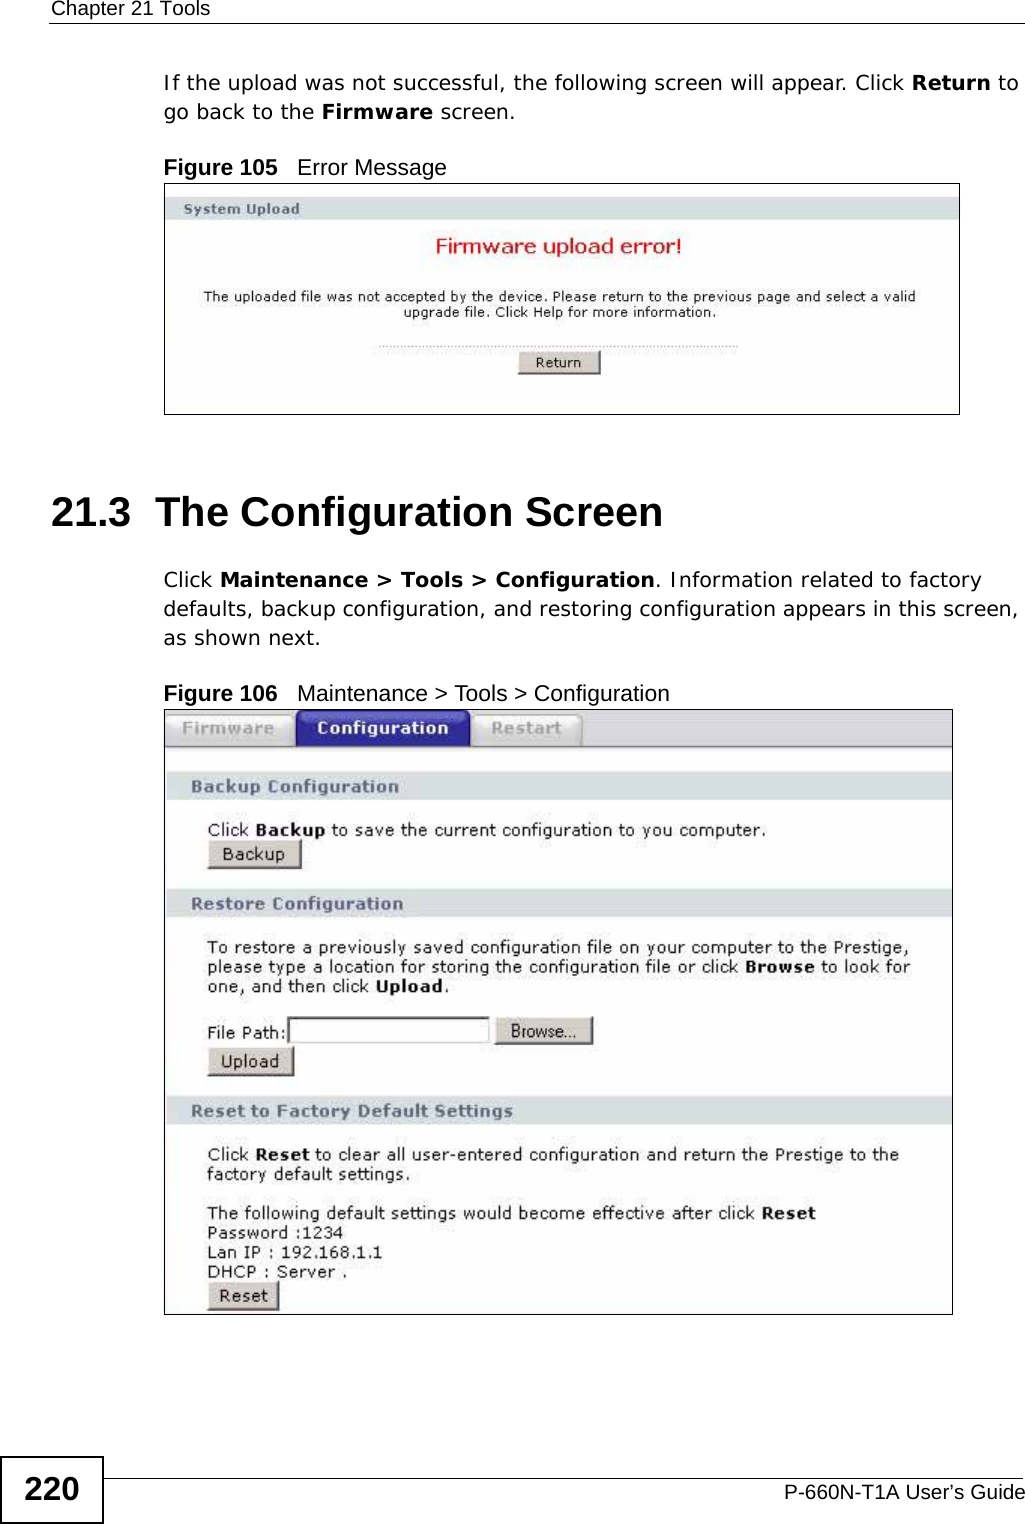 Chapter 21 ToolsP-660N-T1A User’s Guide220If the upload was not successful, the following screen will appear. Click Return to go back to the Firmware screen.Figure 105   Error Message21.3  The Configuration Screen Click Maintenance &gt; Tools &gt; Configuration. Information related to factory defaults, backup configuration, and restoring configuration appears in this screen, as shown next.Figure 106   Maintenance &gt; Tools &gt; Configuration